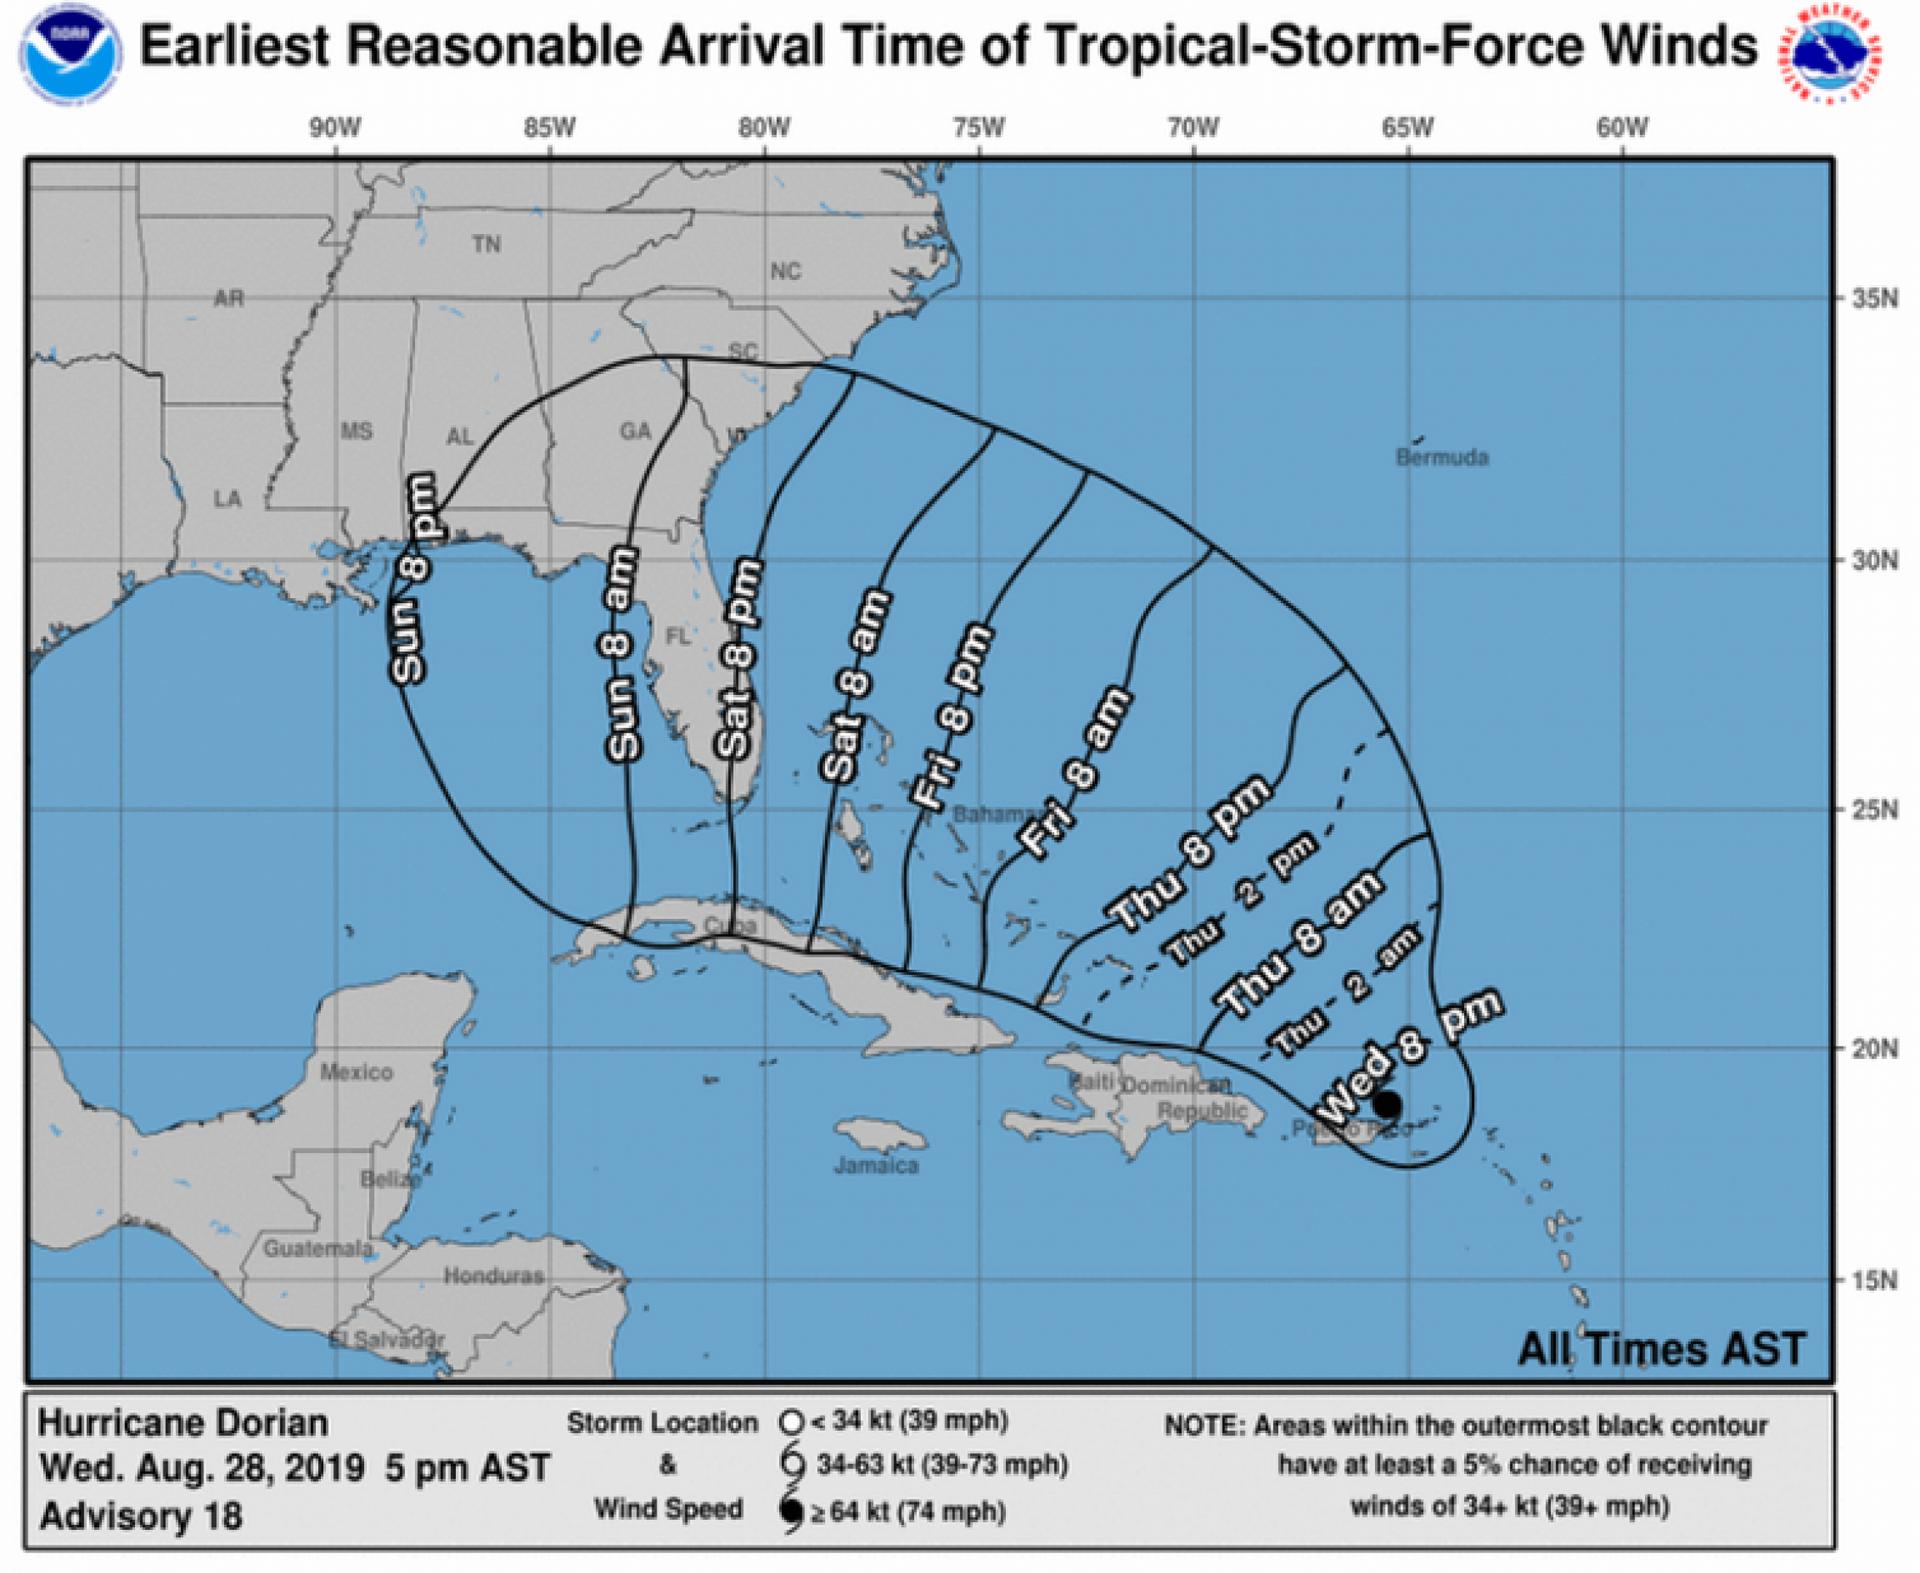 A map of the hurricane's projected location by time. 